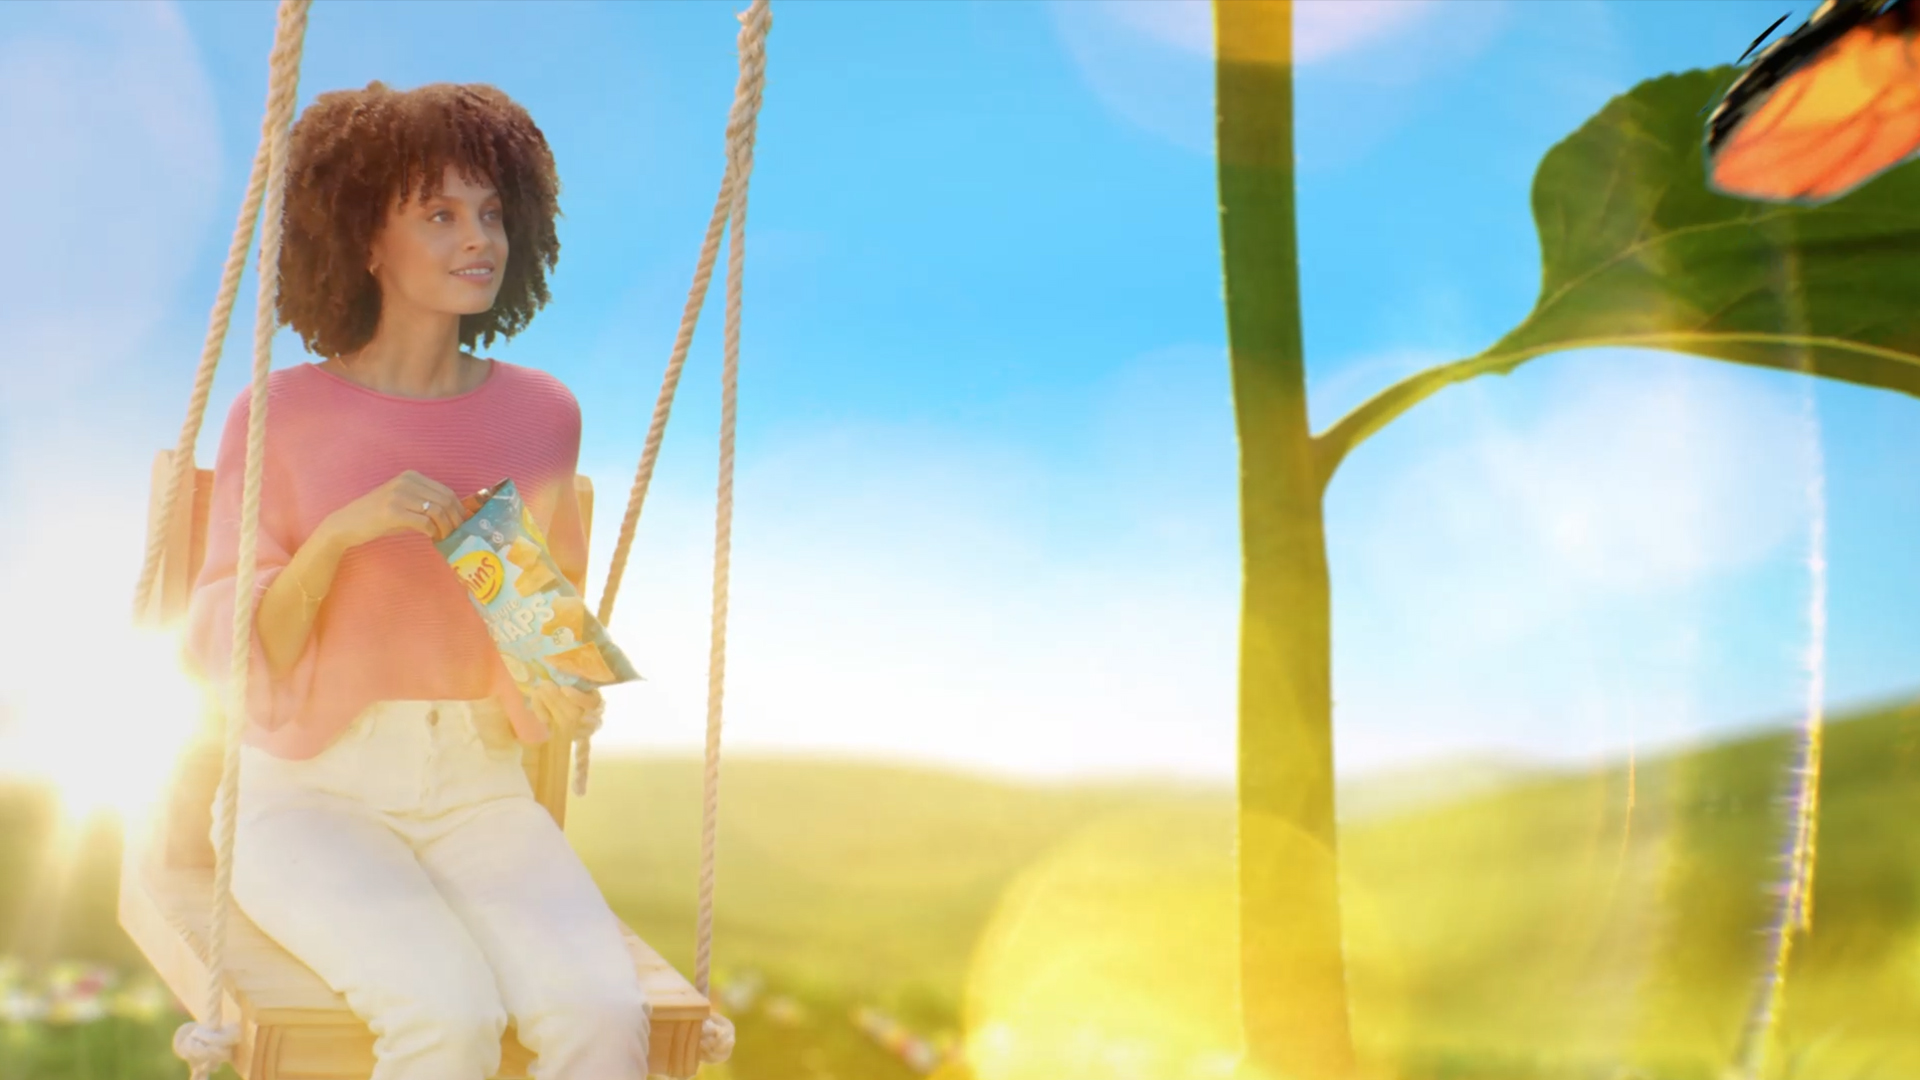 Still from the VANDAL produced Thins Veggie Snaps TVC featuring a VFX world with a woman on a swing eating chips